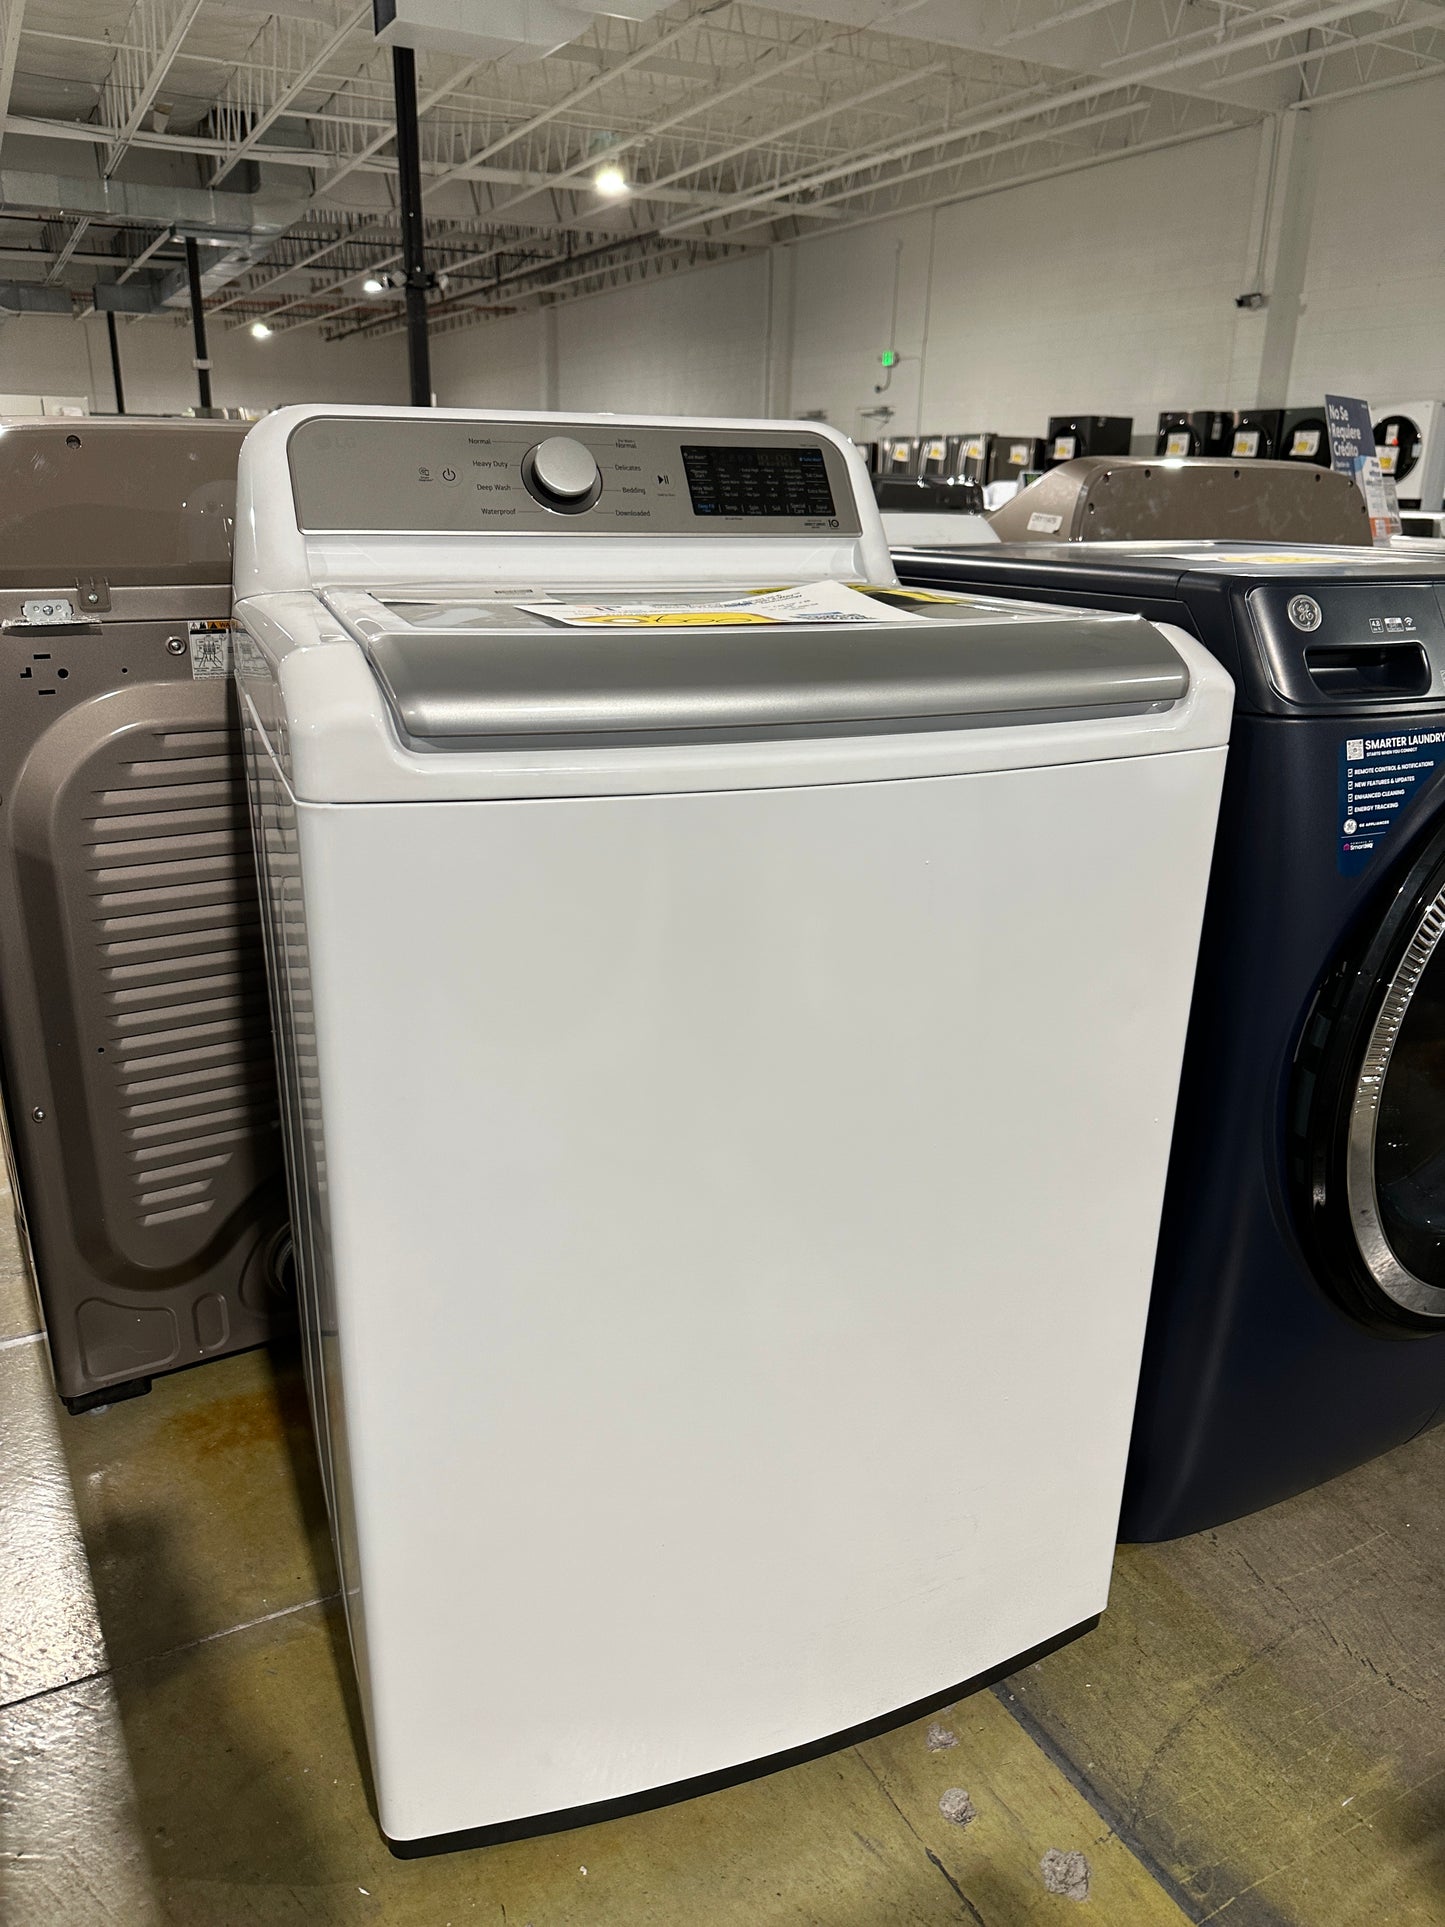 New LG Top Load Washer with 4-Way Agitator and TurboWash3D - White  MODEL:WT7405CW  WAS11978S